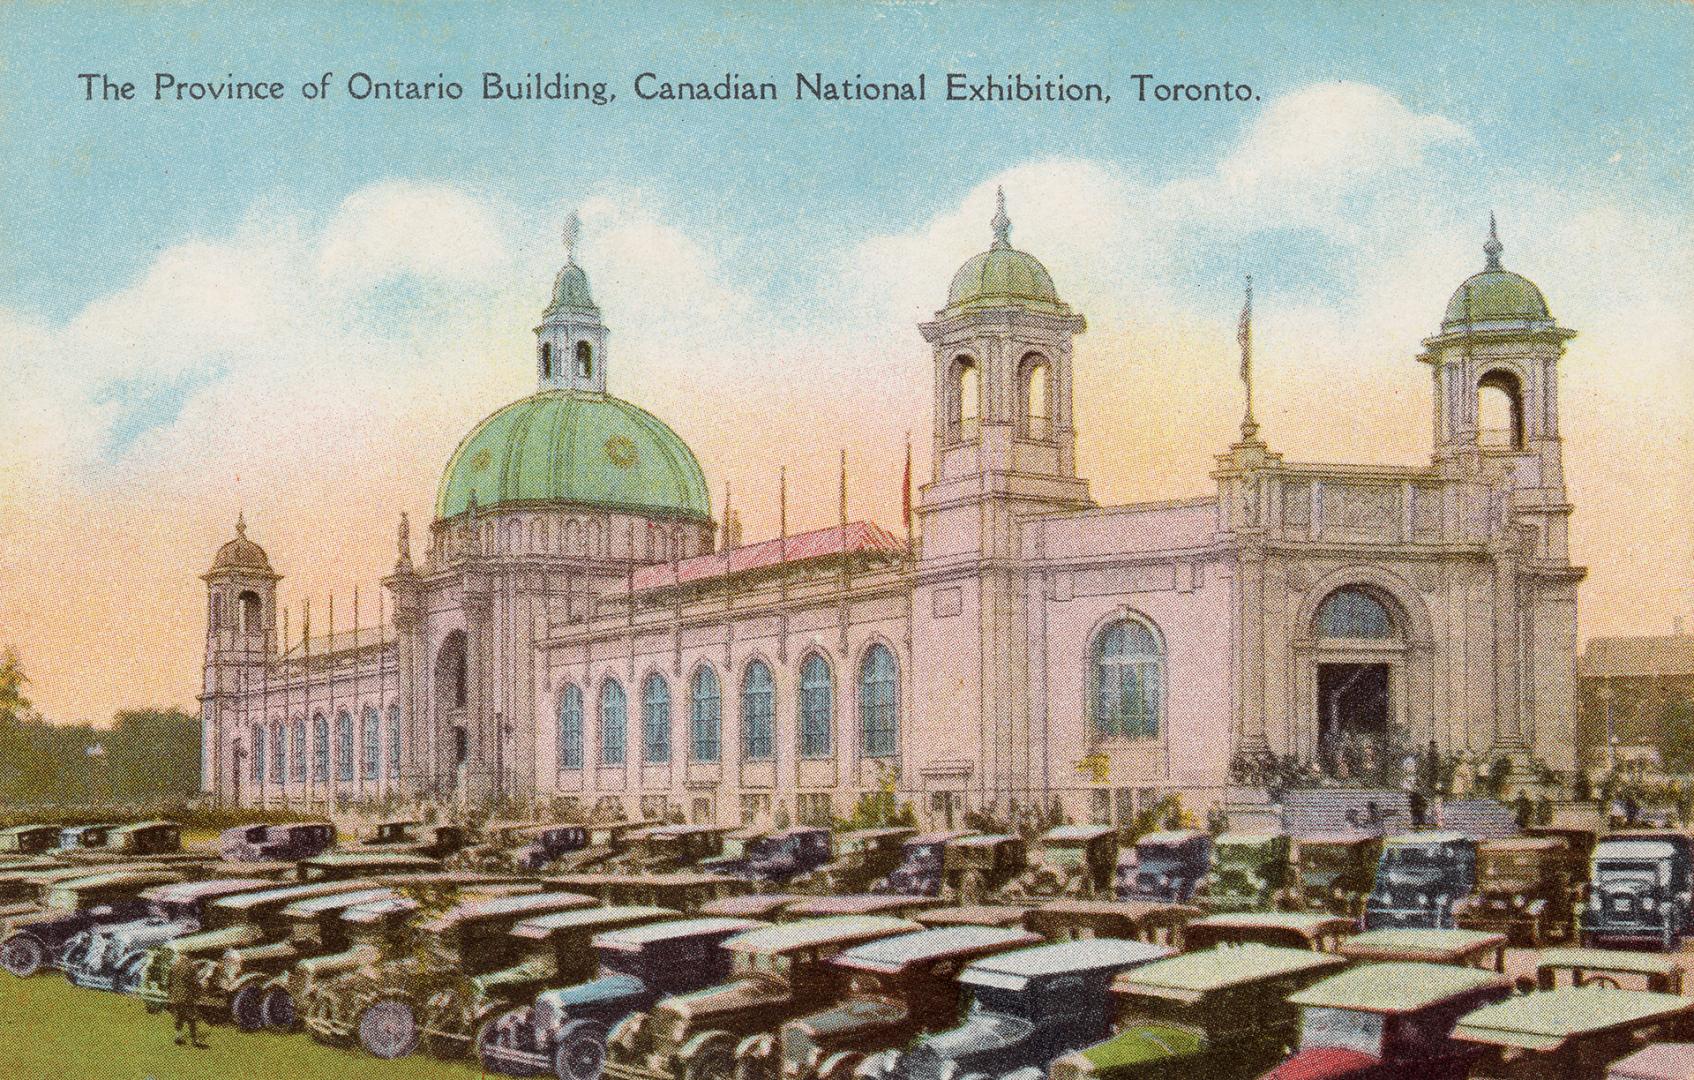 Colorized photograph of a large domed building with towers.